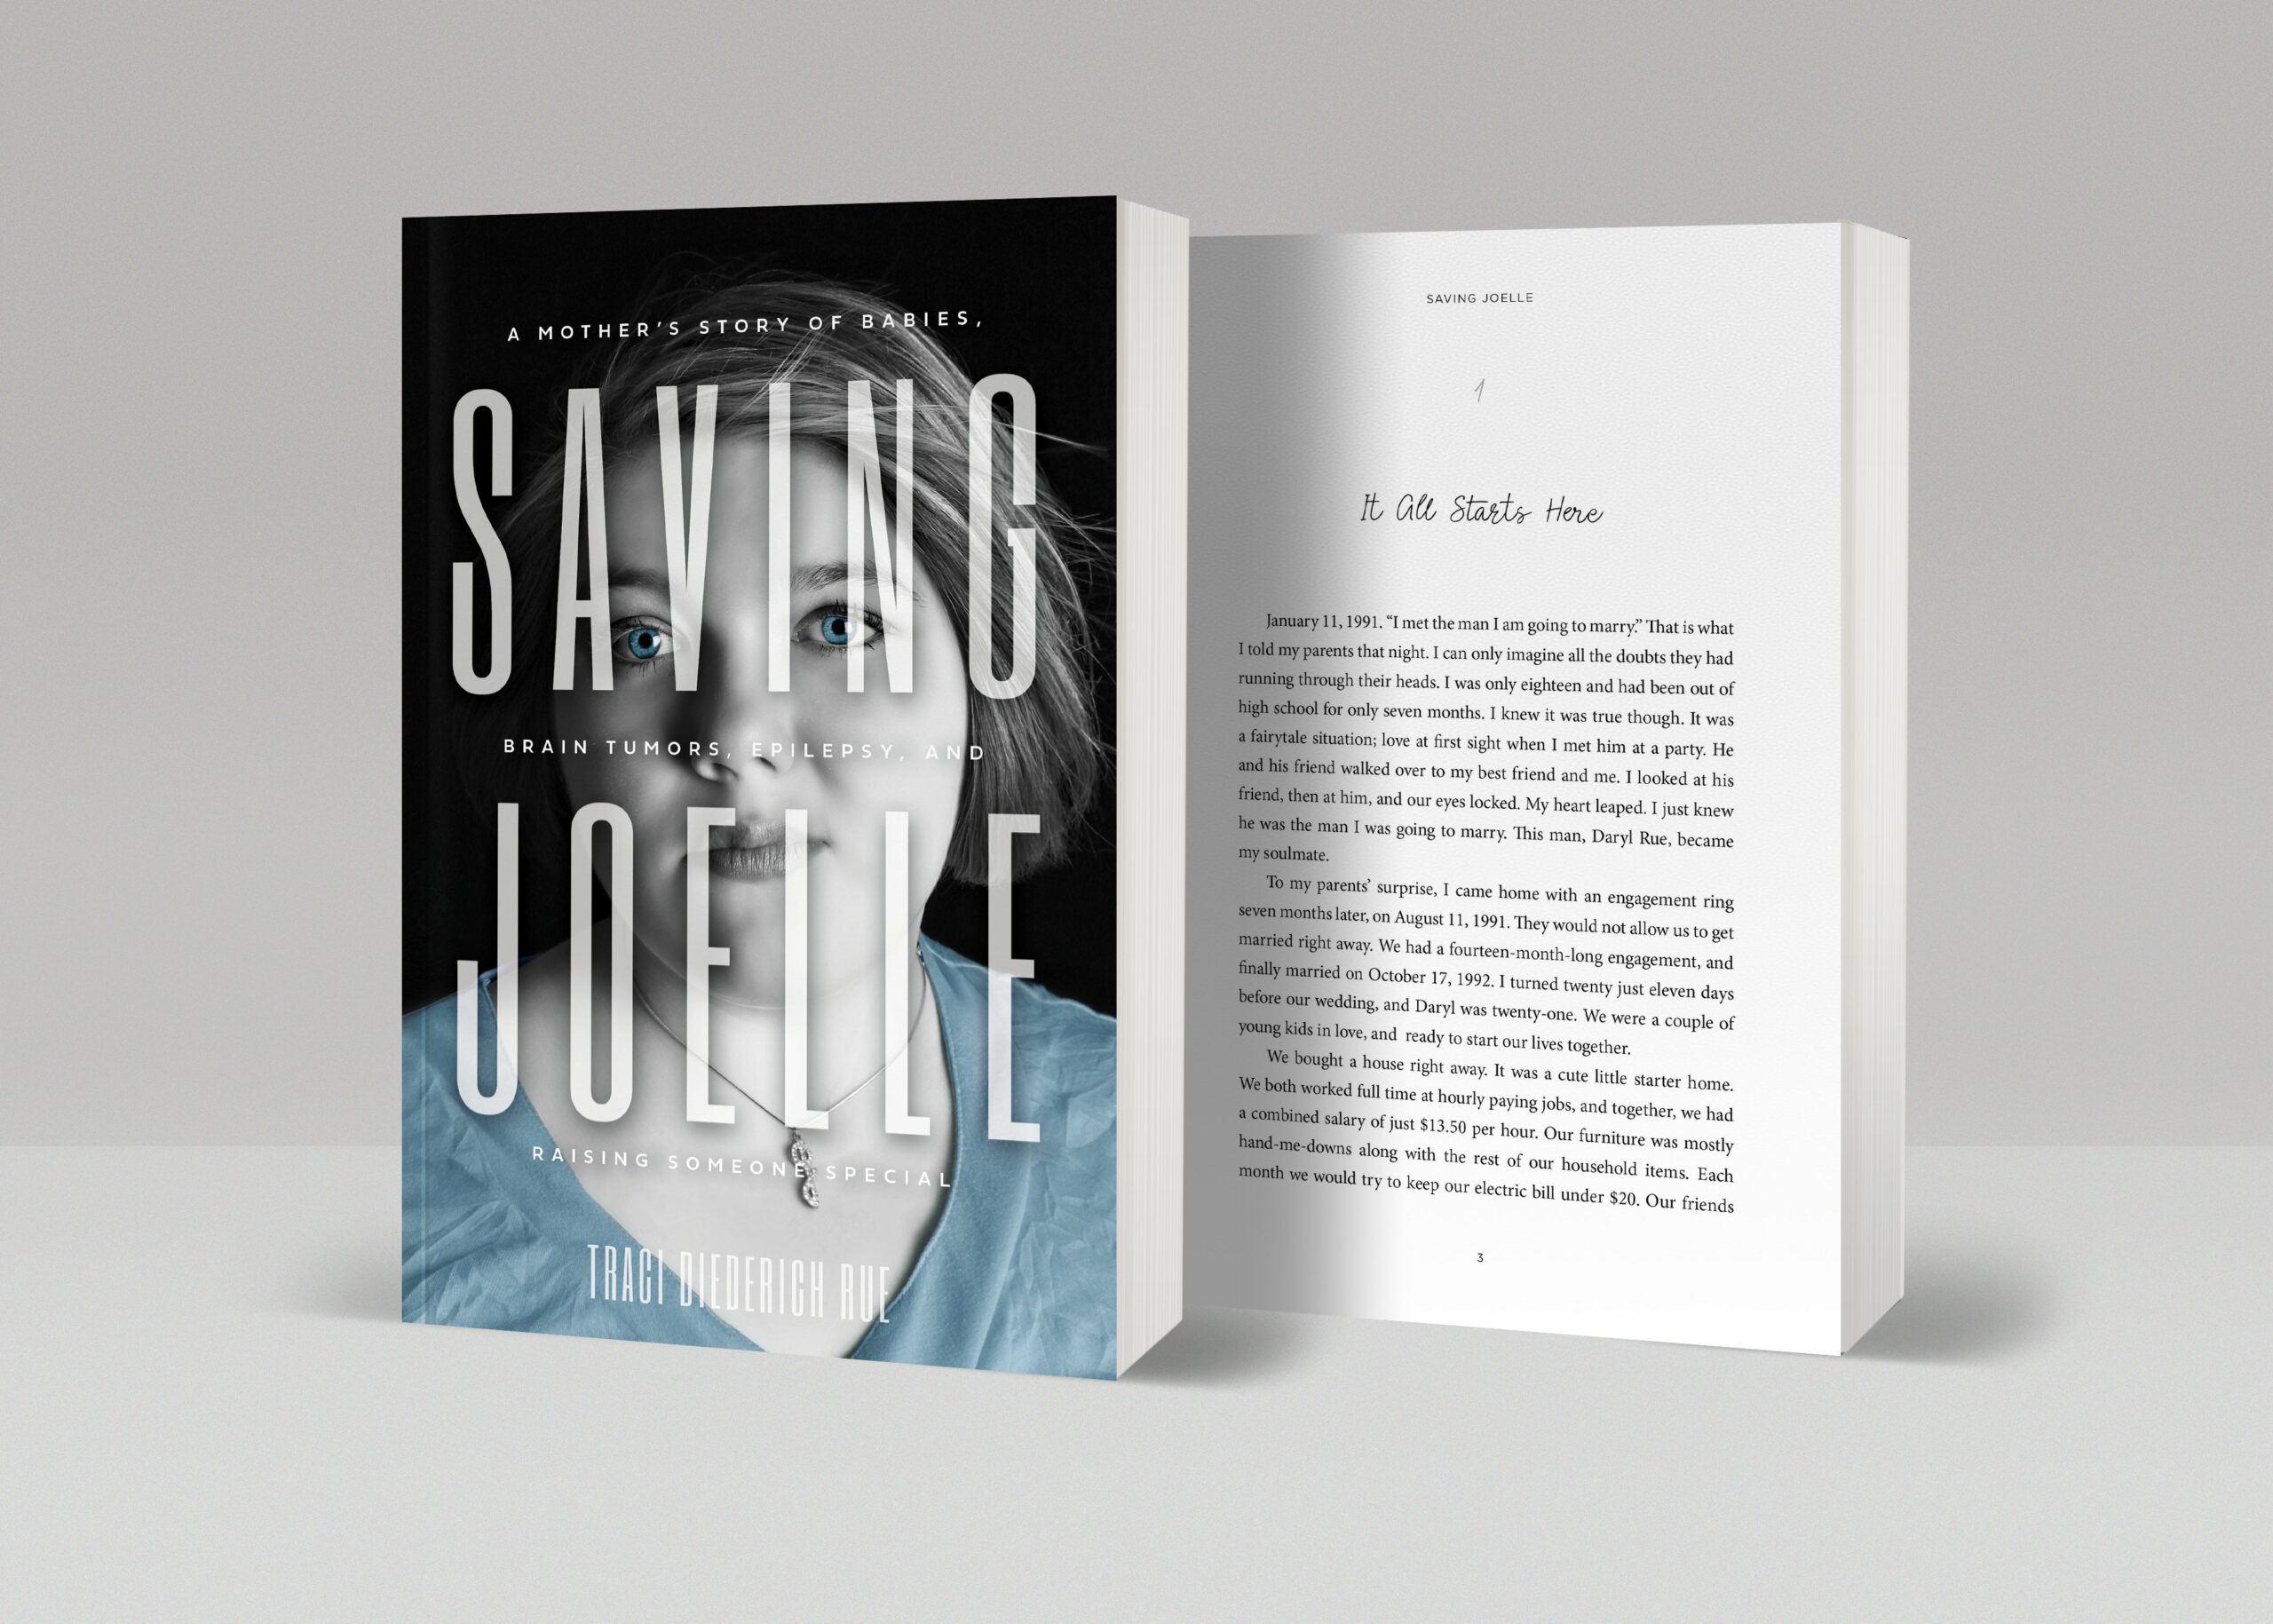 Saving Joelle book cover and interior design by Katie Kassel